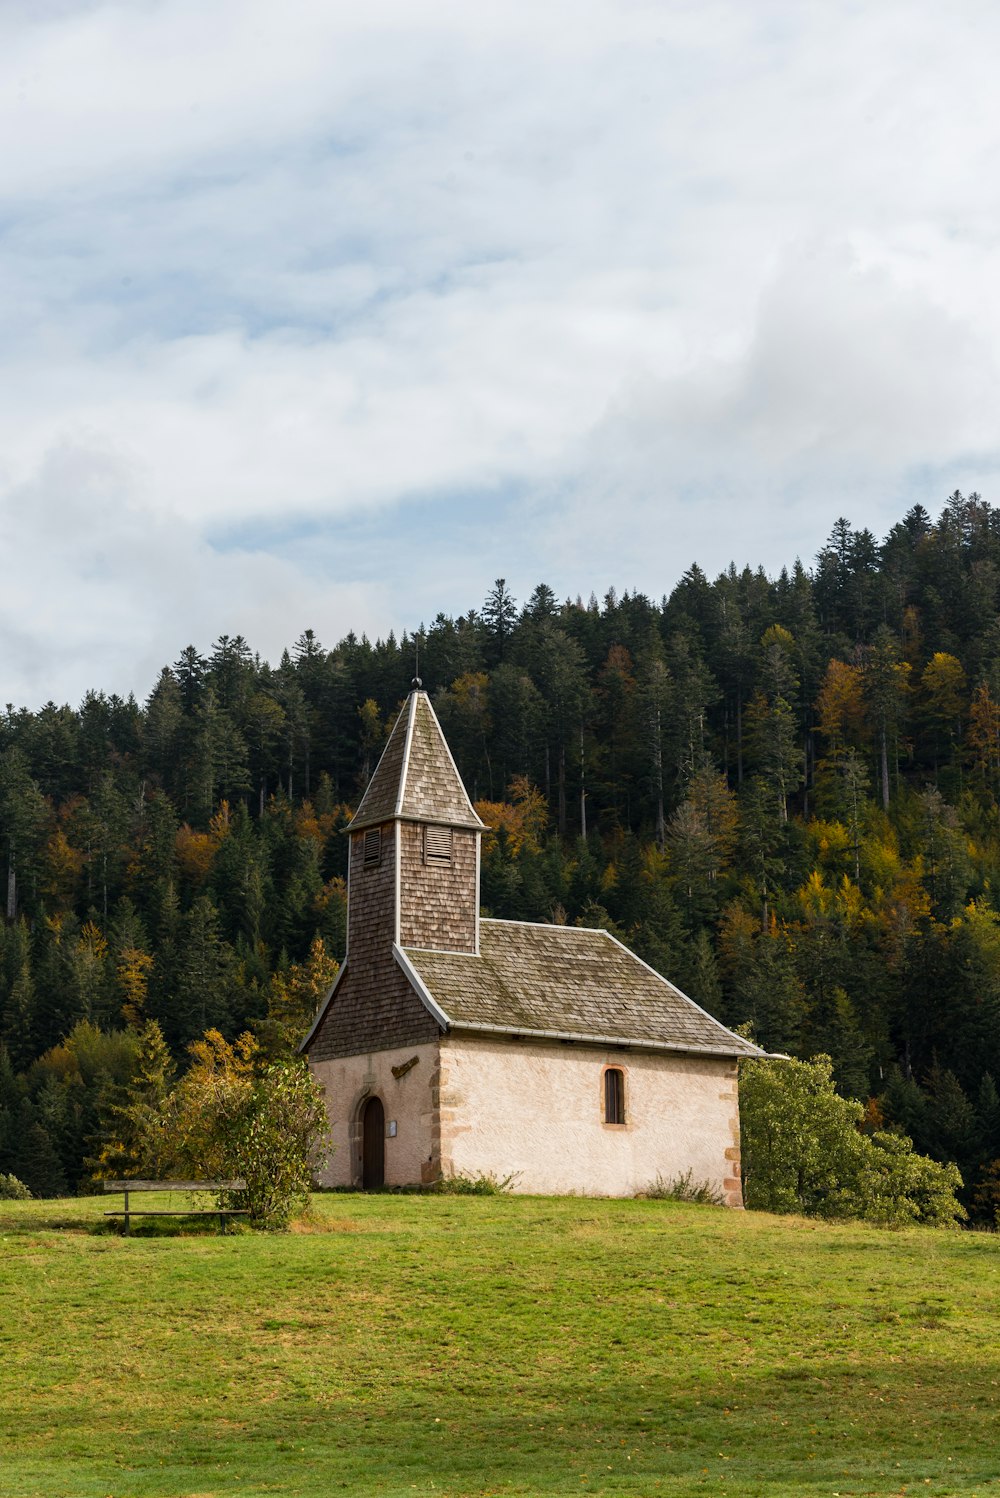 brown and white church surrounded by green trees under white clouds